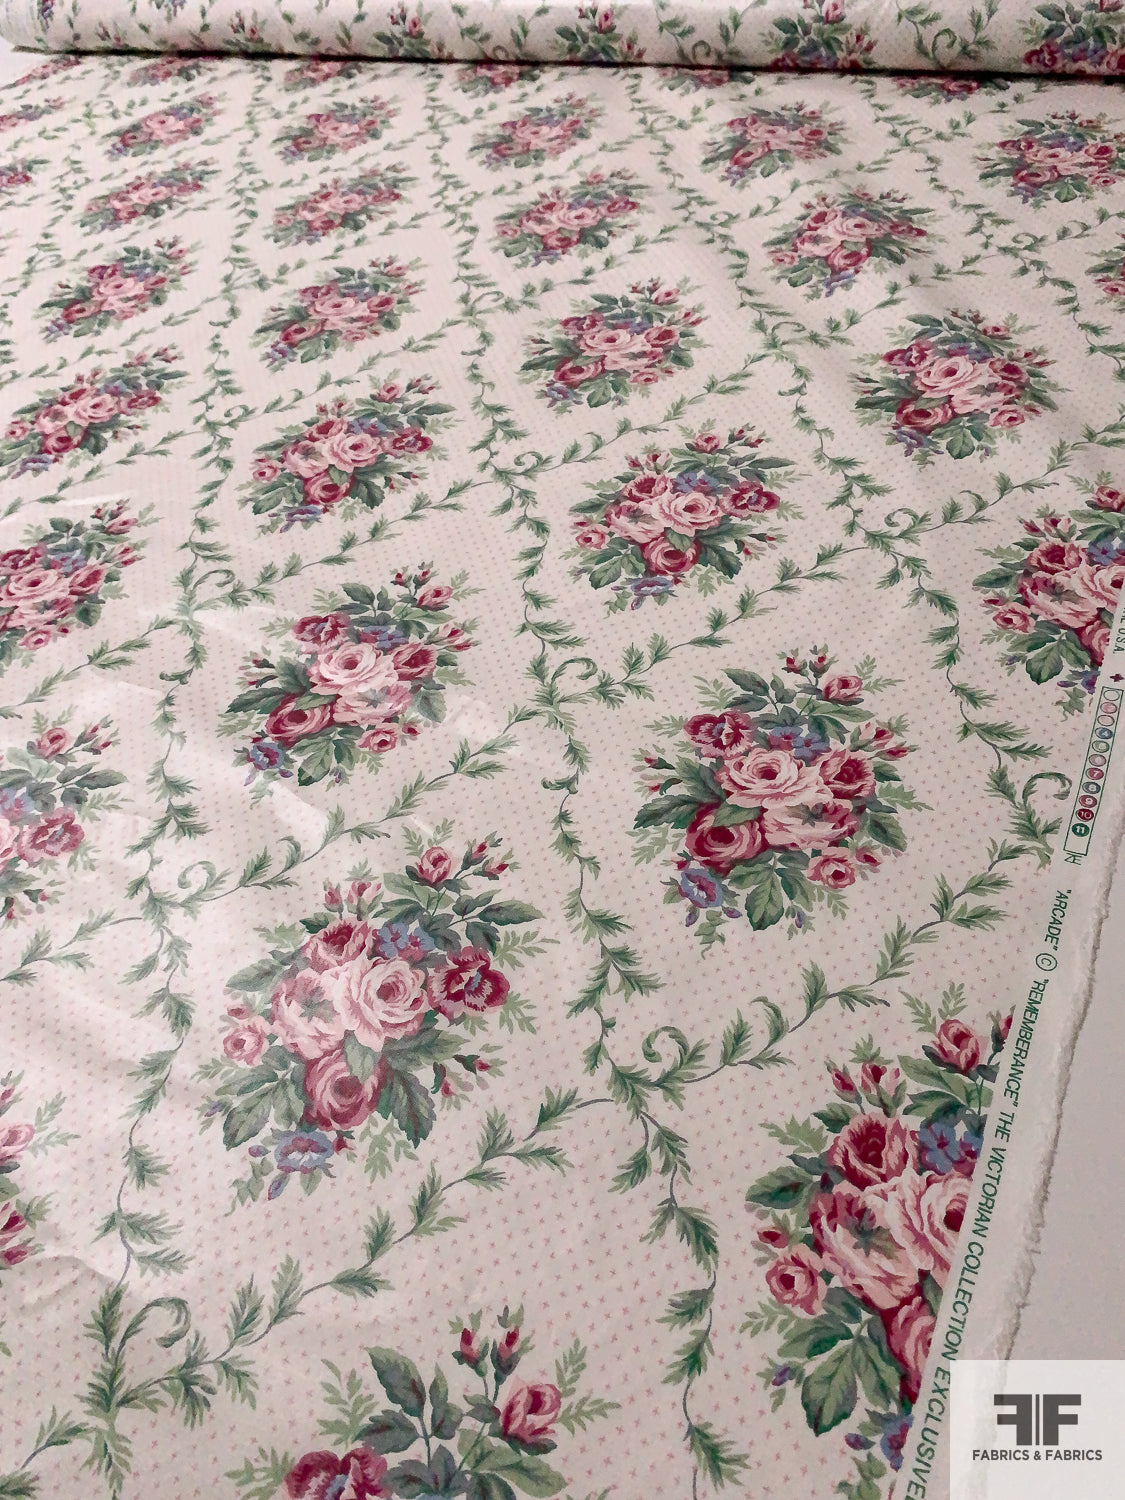 Floral Leaf Grid Printed Cotton Chintz - Light Ivory / Green / Dusty Pinks / Soft Blue